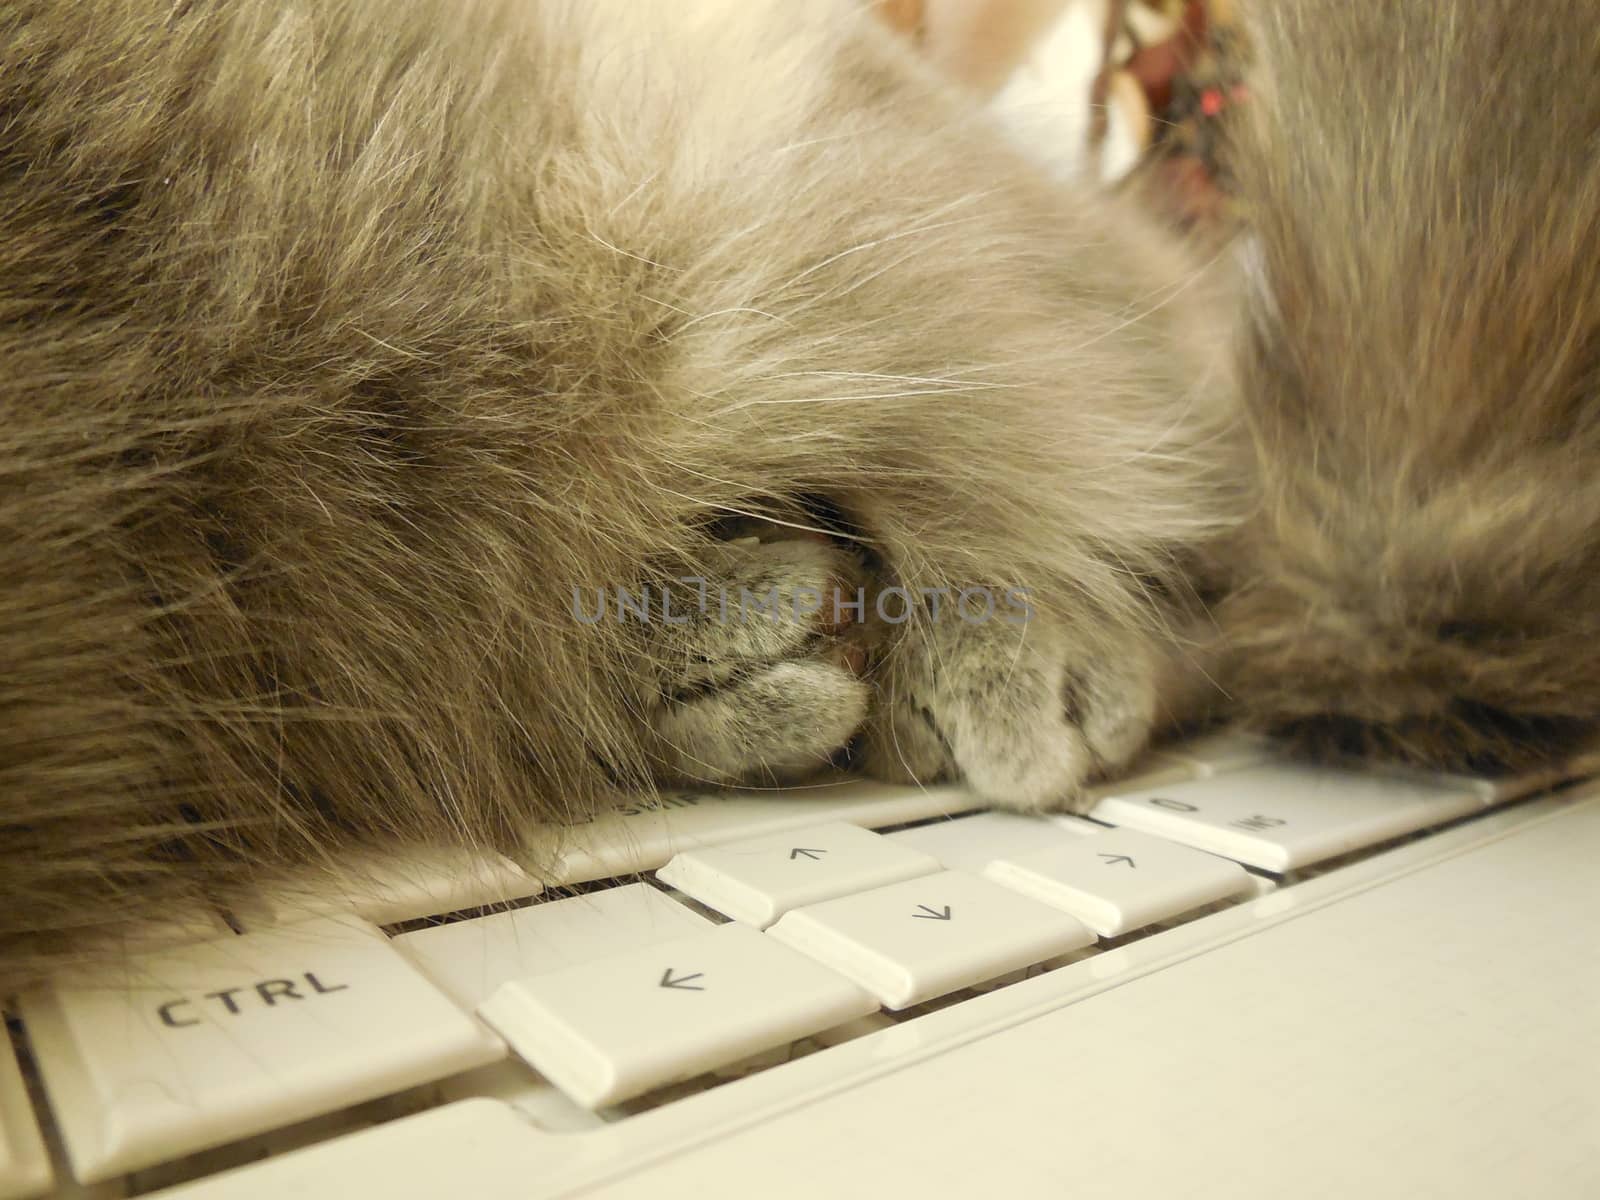 cat paw, which is heated and on a laptop.